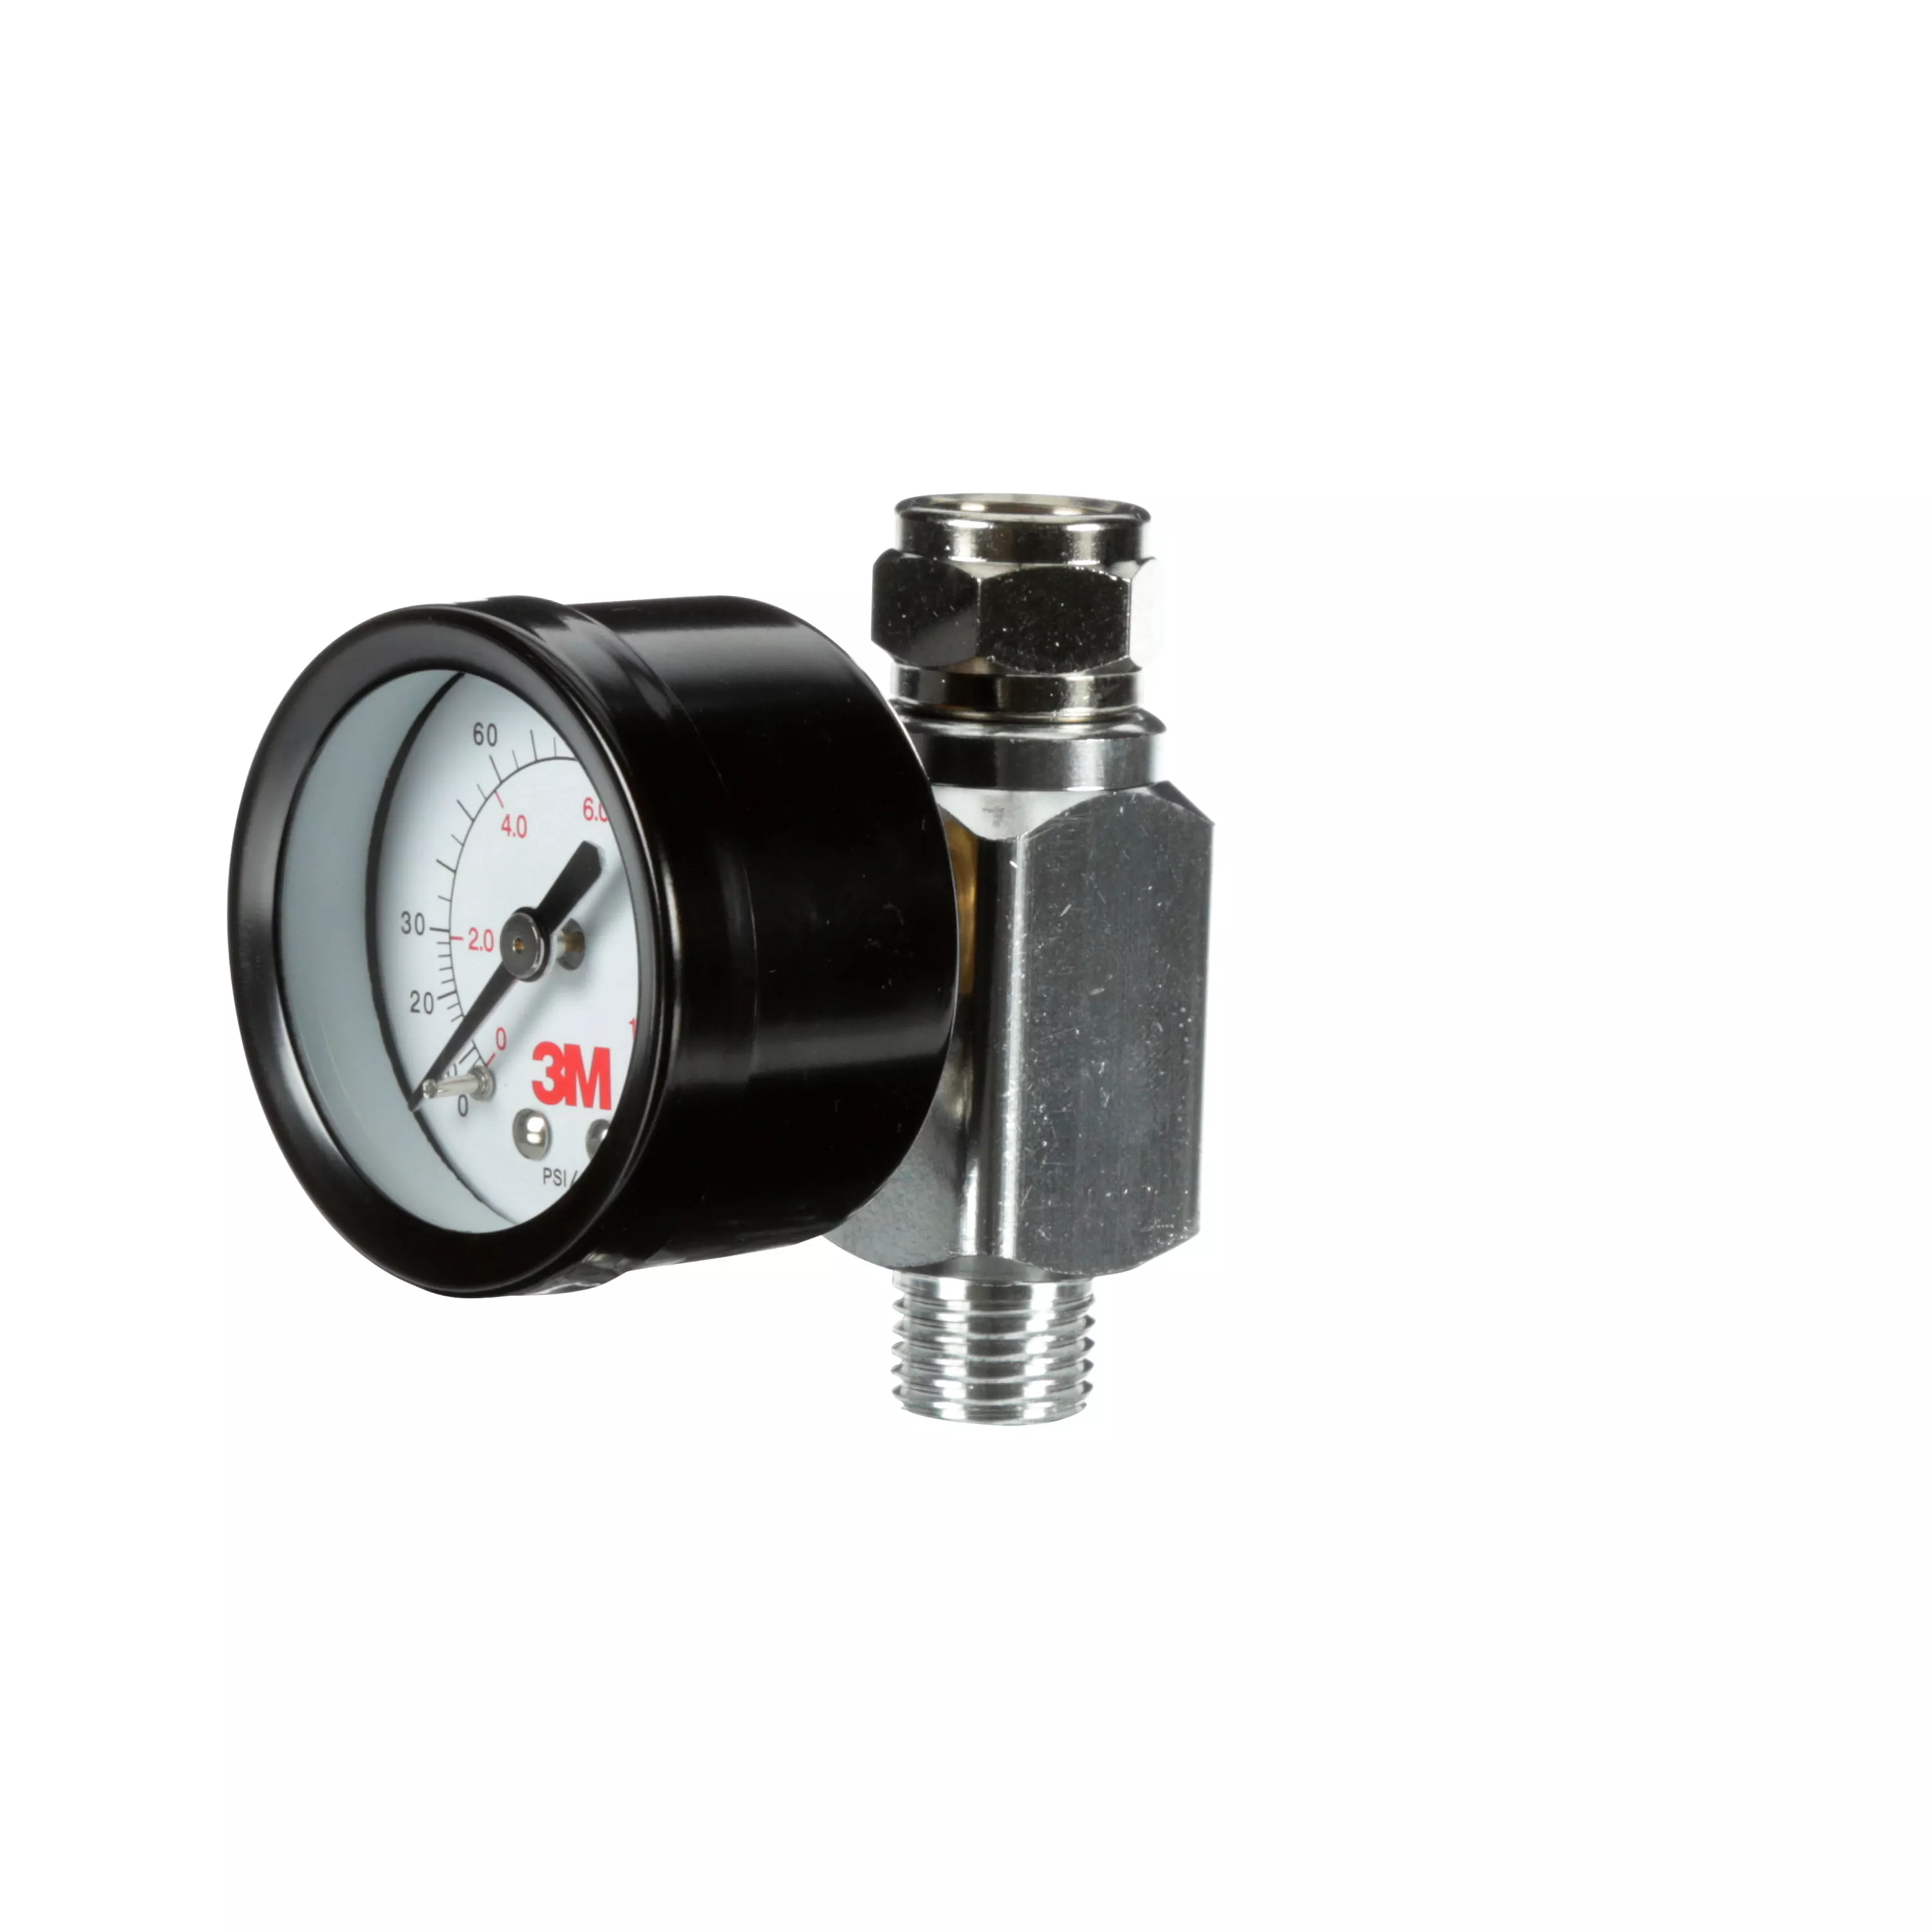 Product Number 16573 | 3M™ Accuspray™ Air Flow Control Valve